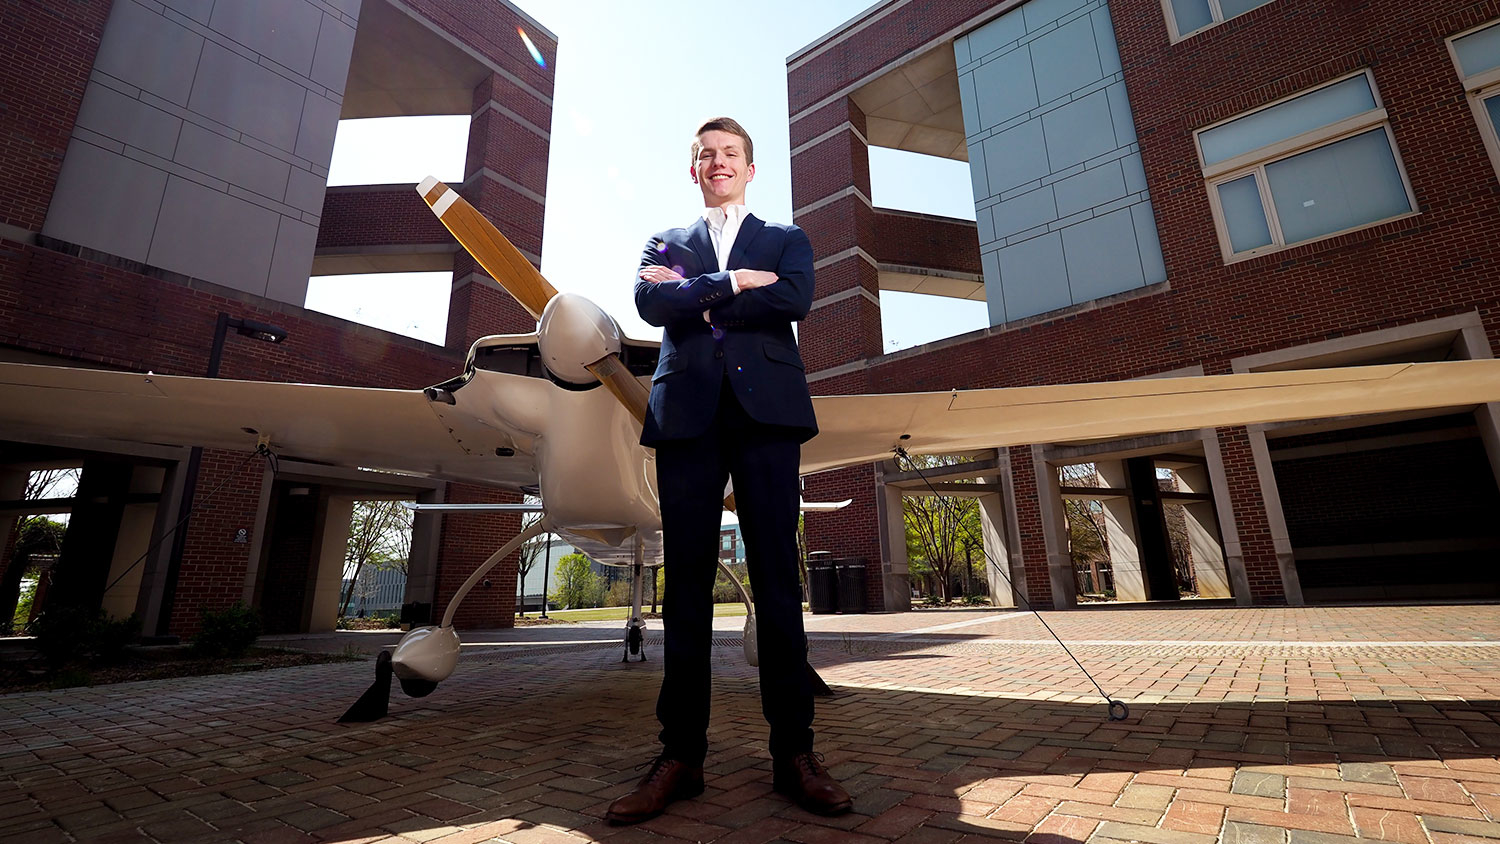 Goldwater Scholar Andrew Mistele in front of an airplane near the Engineering buildings on Centennial Campus